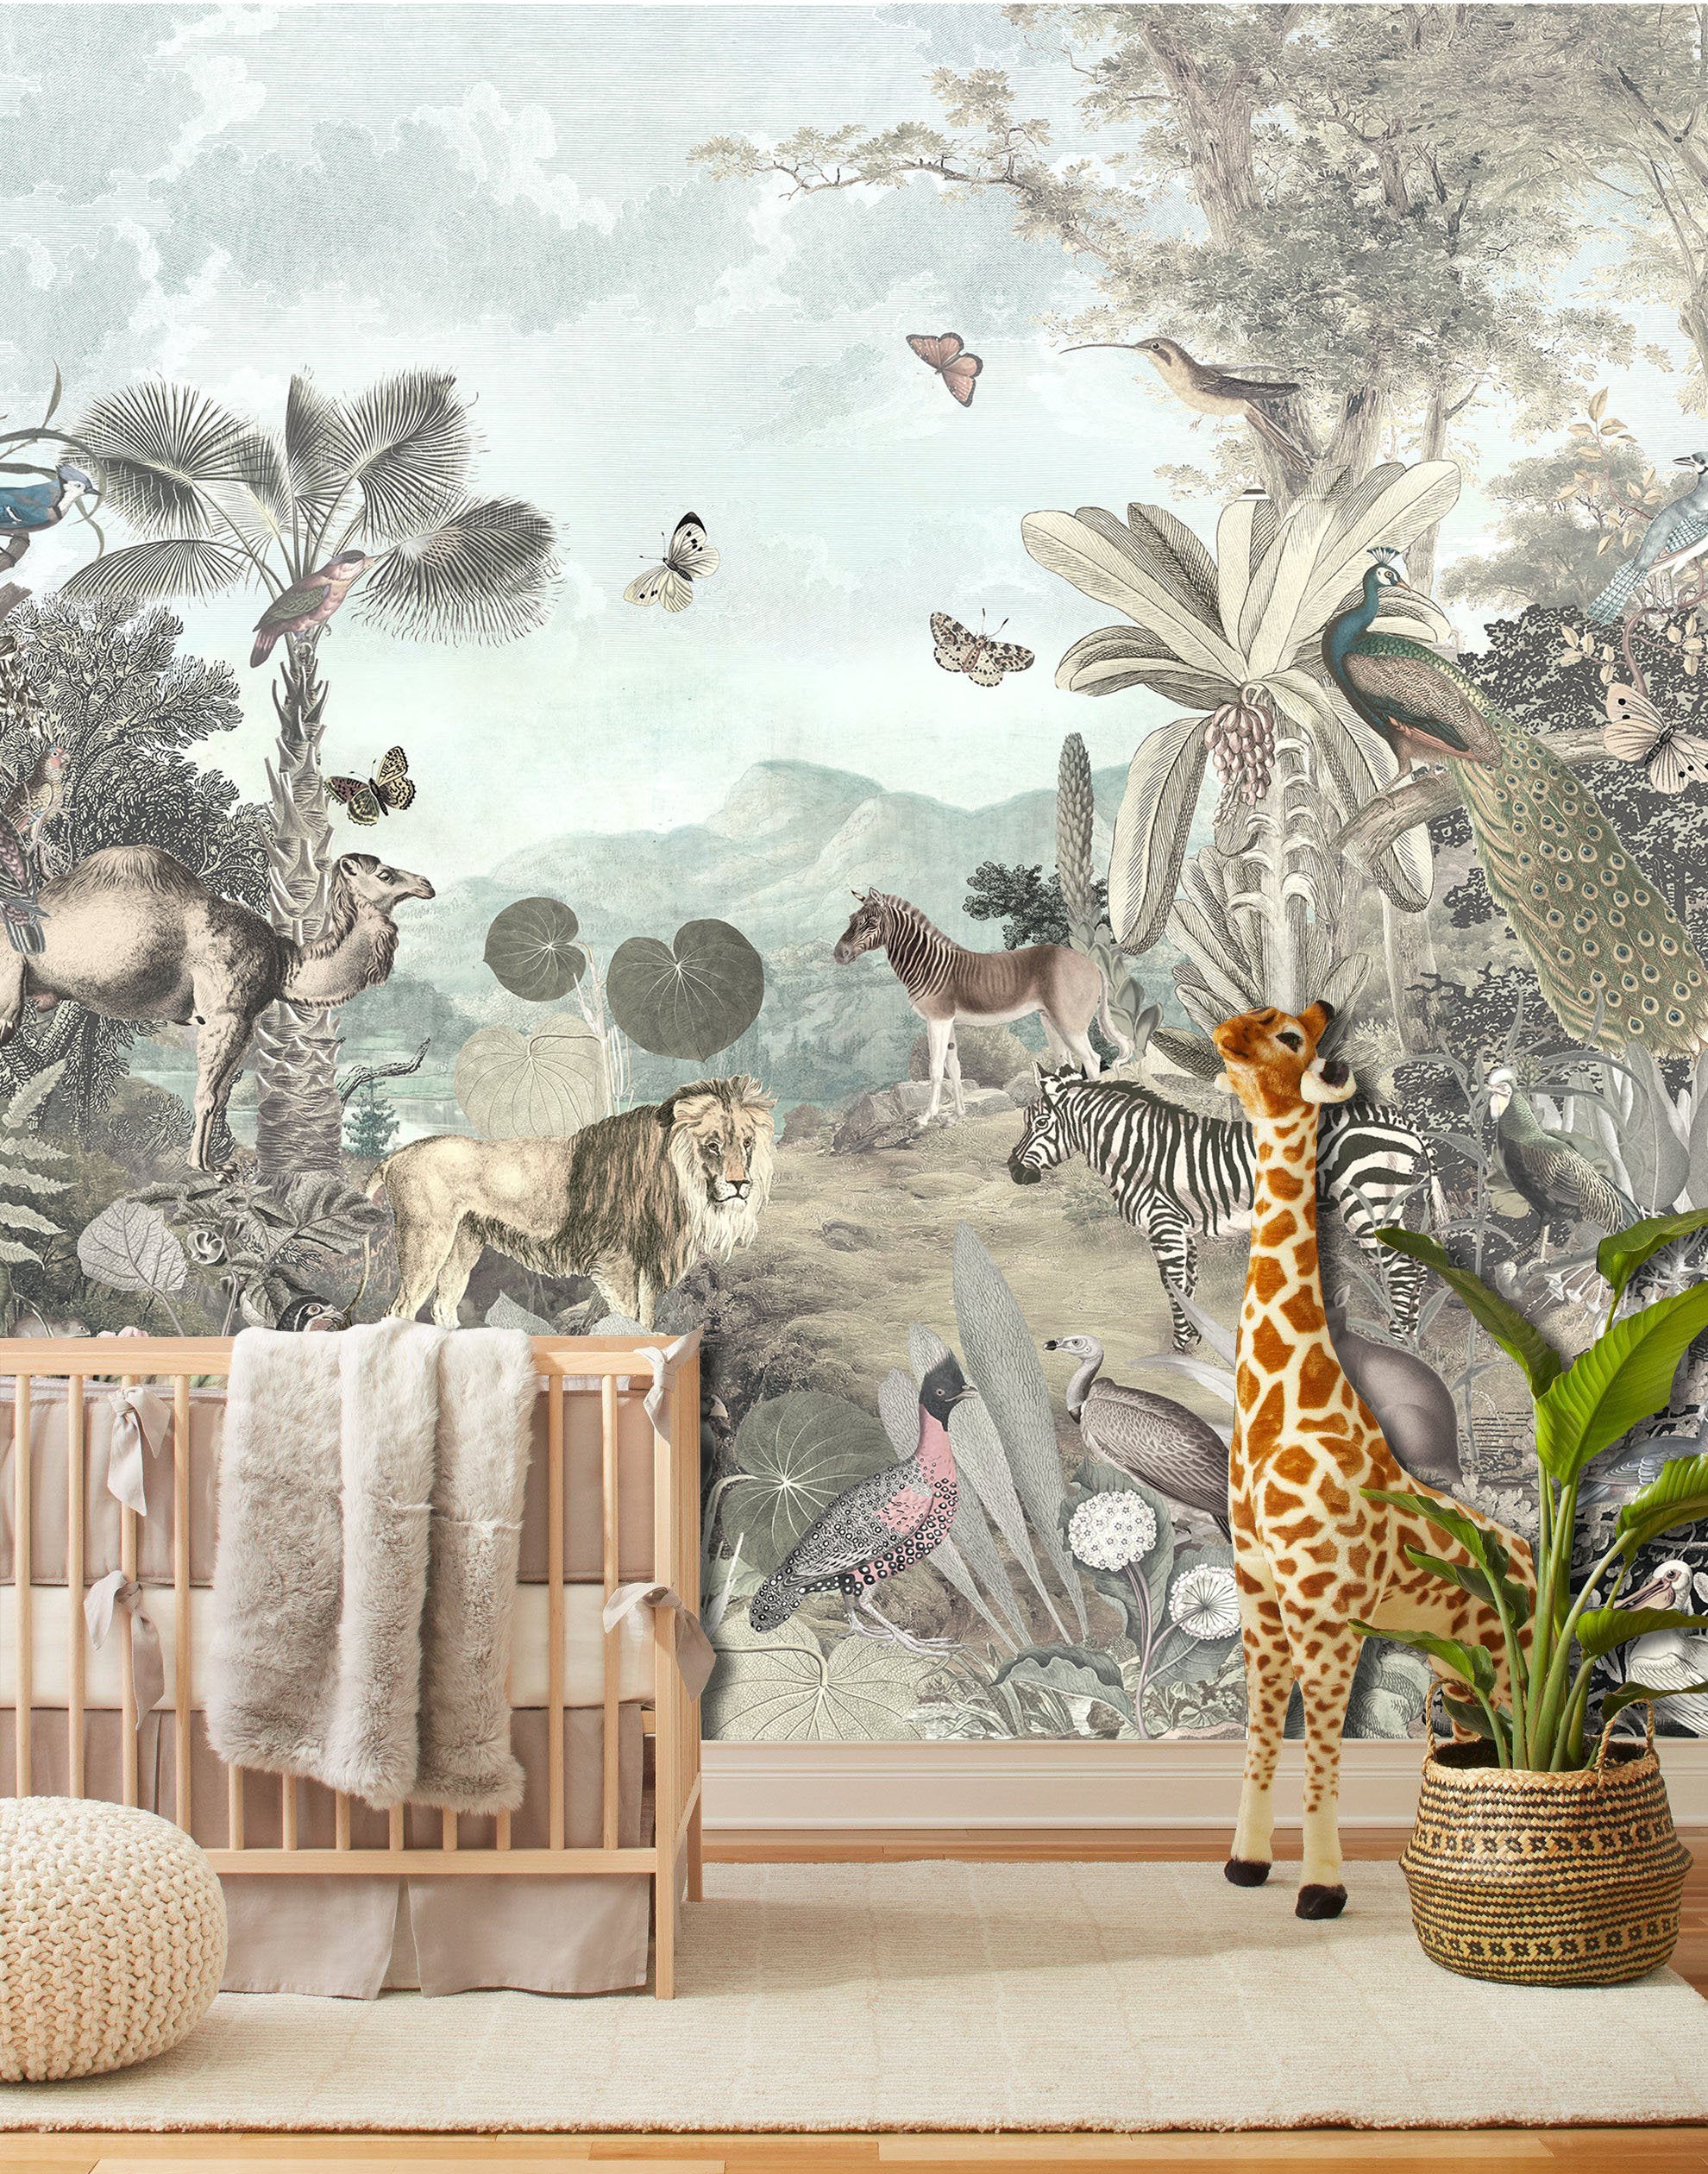 The Animals in Tropical Jungle Wallpaper Mural Home Decor